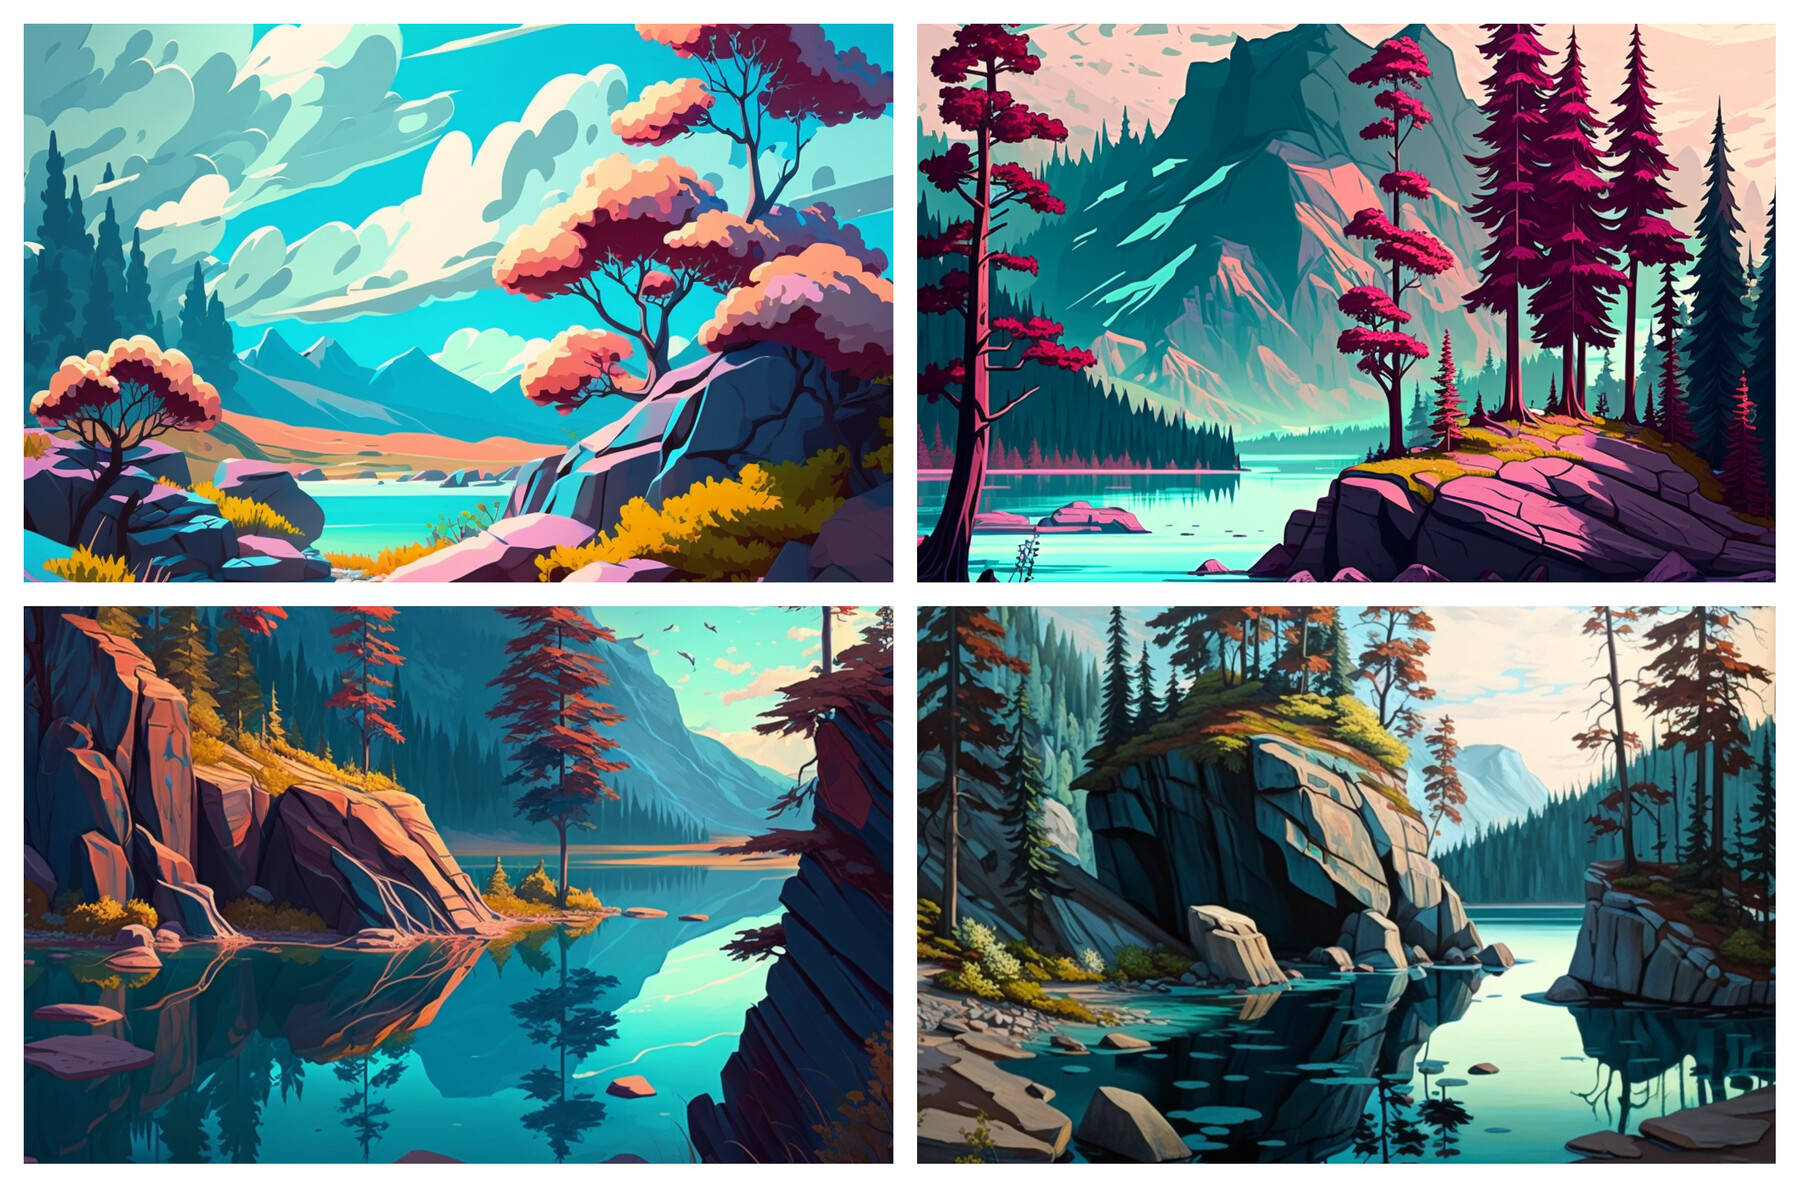 ArtStation - 20+ Images of beautiful nature landscapes for references ...